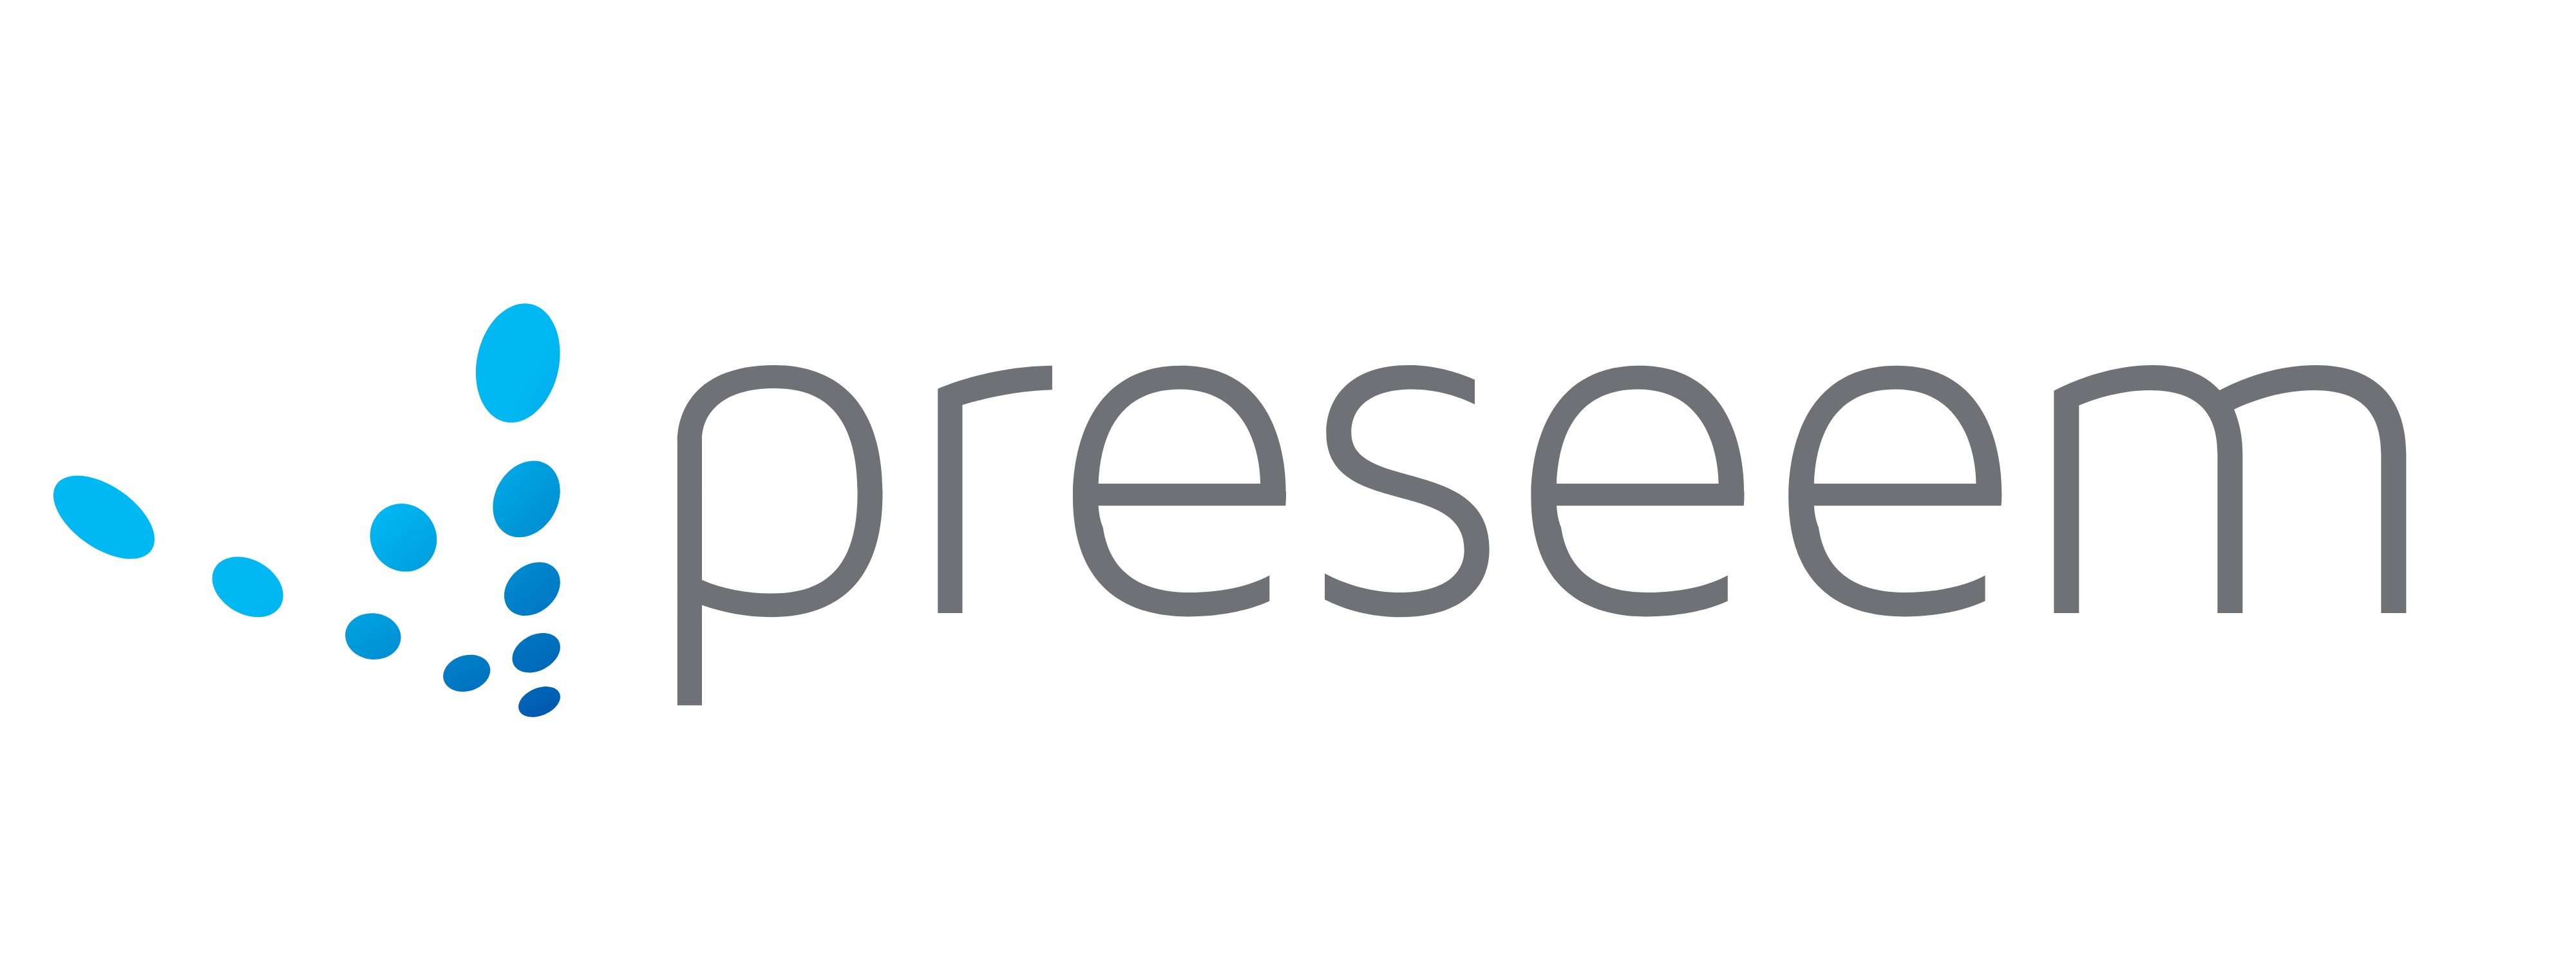 Preseem has joined the Fiber Broadband Association to help advance access to reliable broadband for all